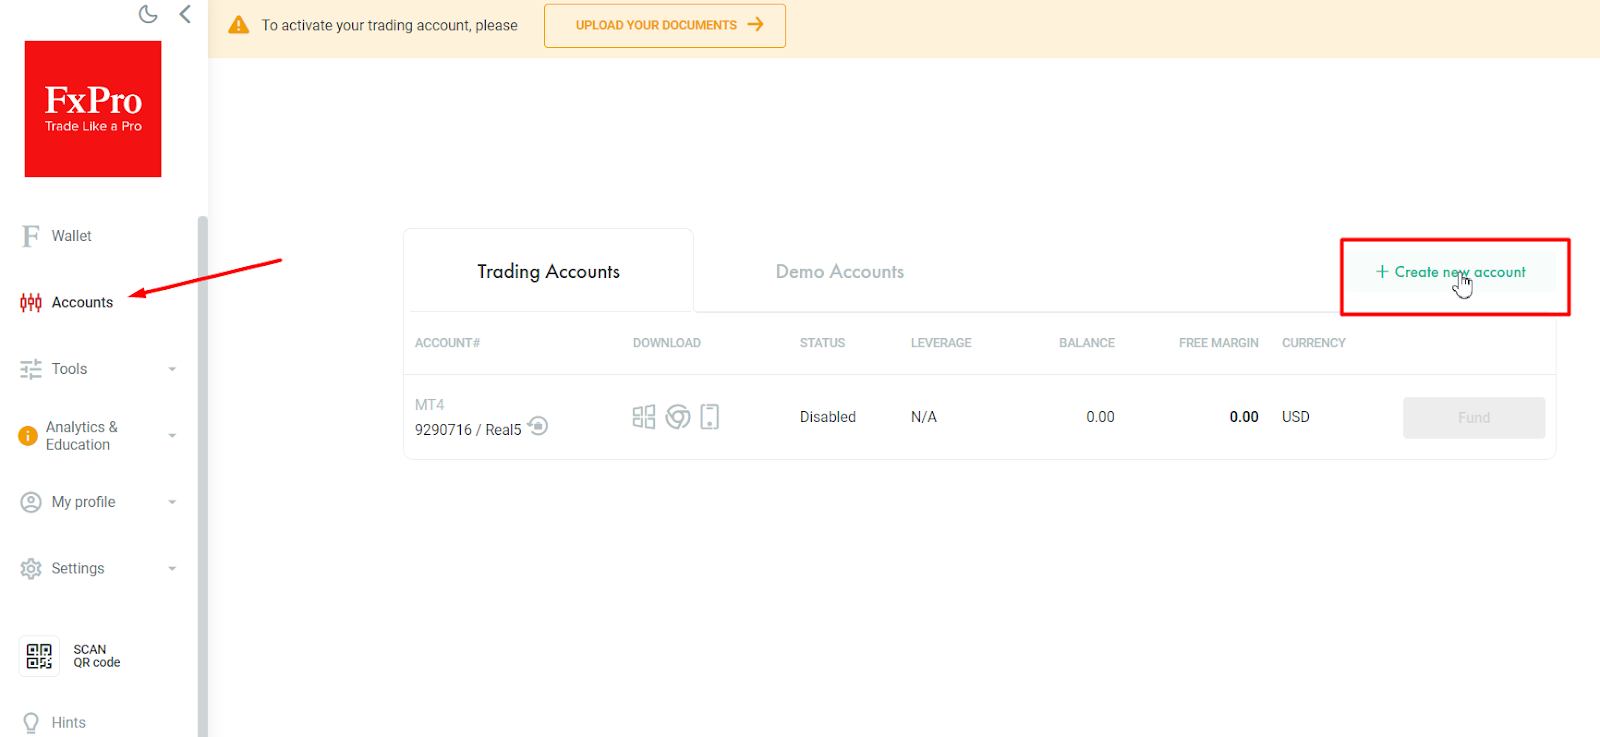 Photo: Opening a real account on FxPro Direct